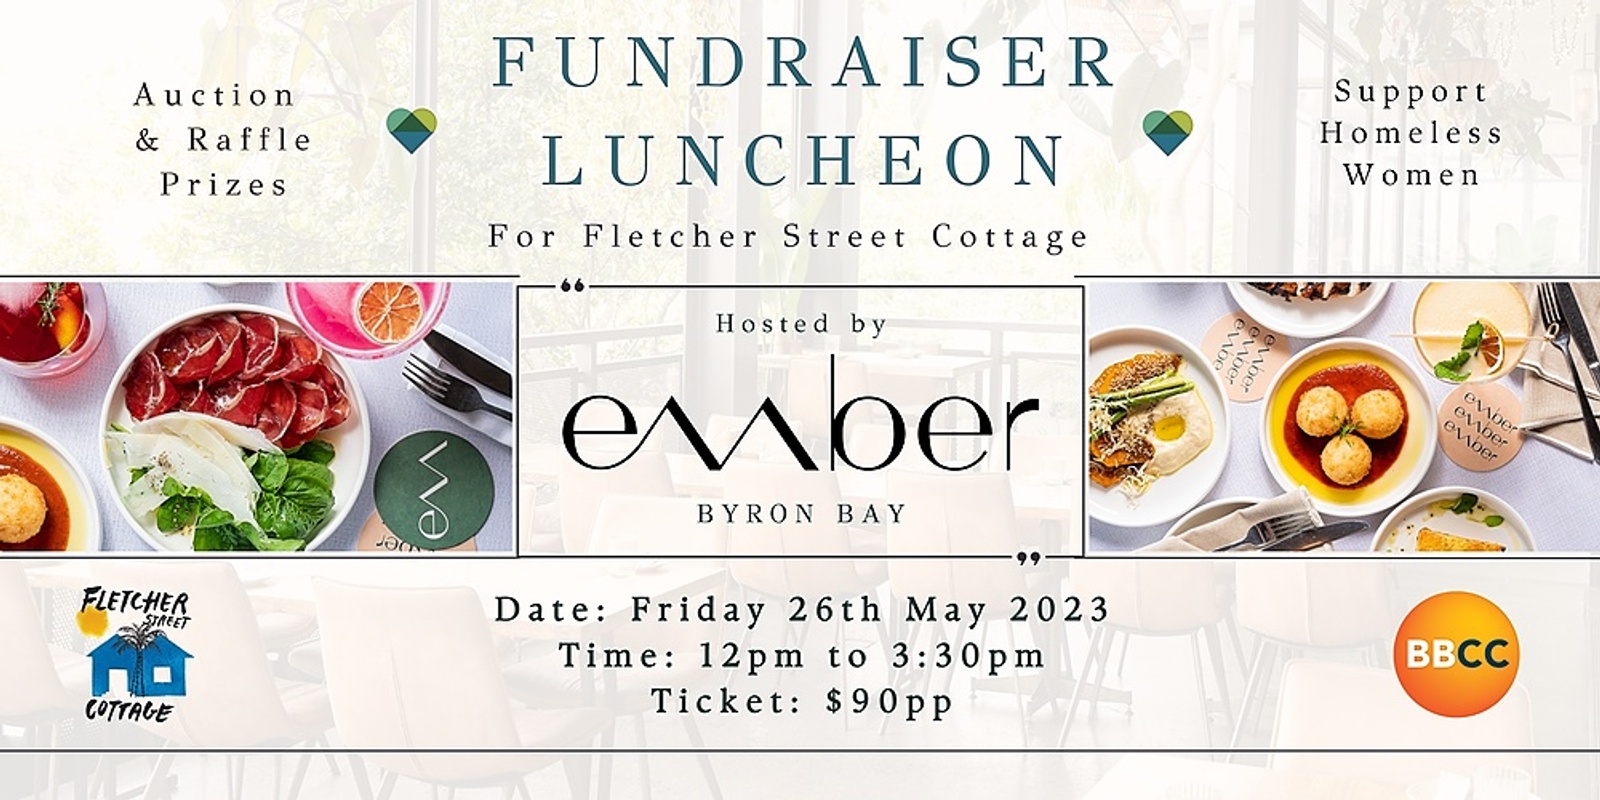 Fundraiser Luncheon for Fletcher Street Cottage Hosted by Ember Byron Bay